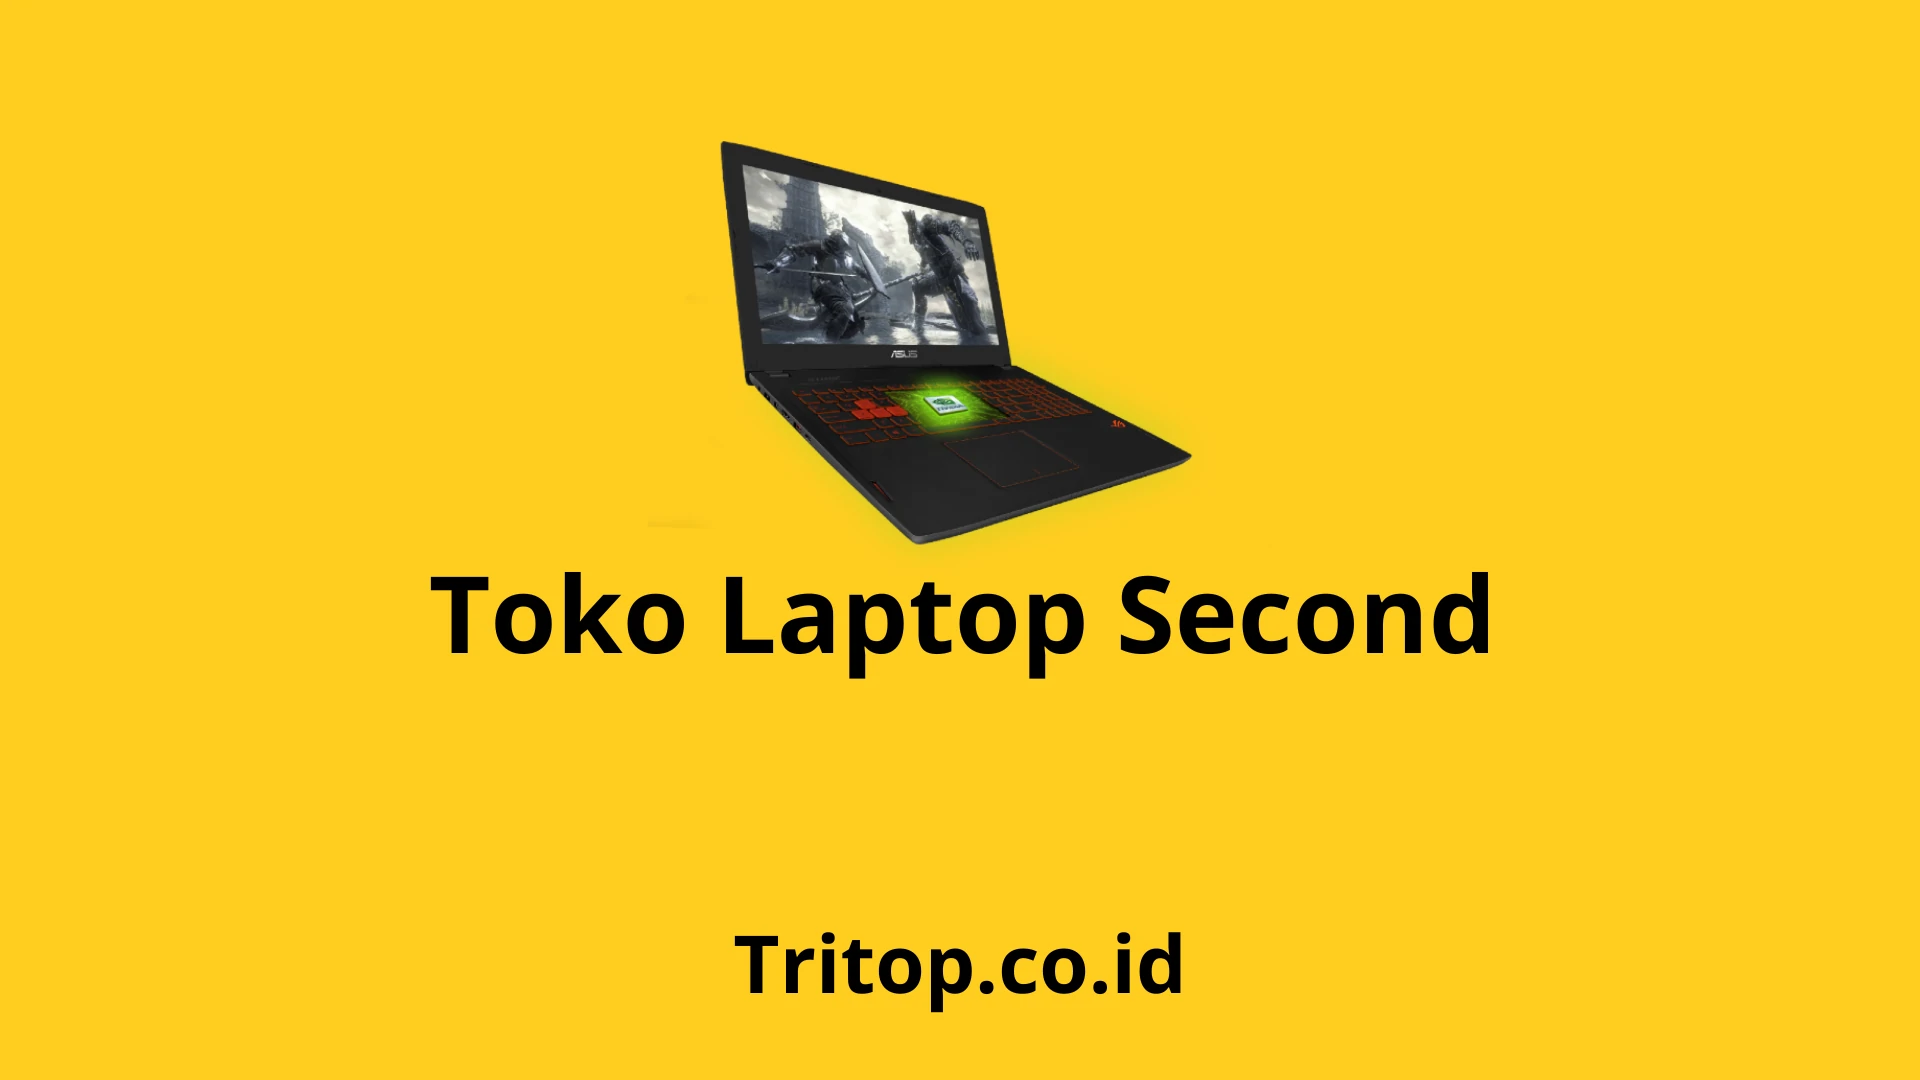 Toko Laptop Second Tritop.co.id